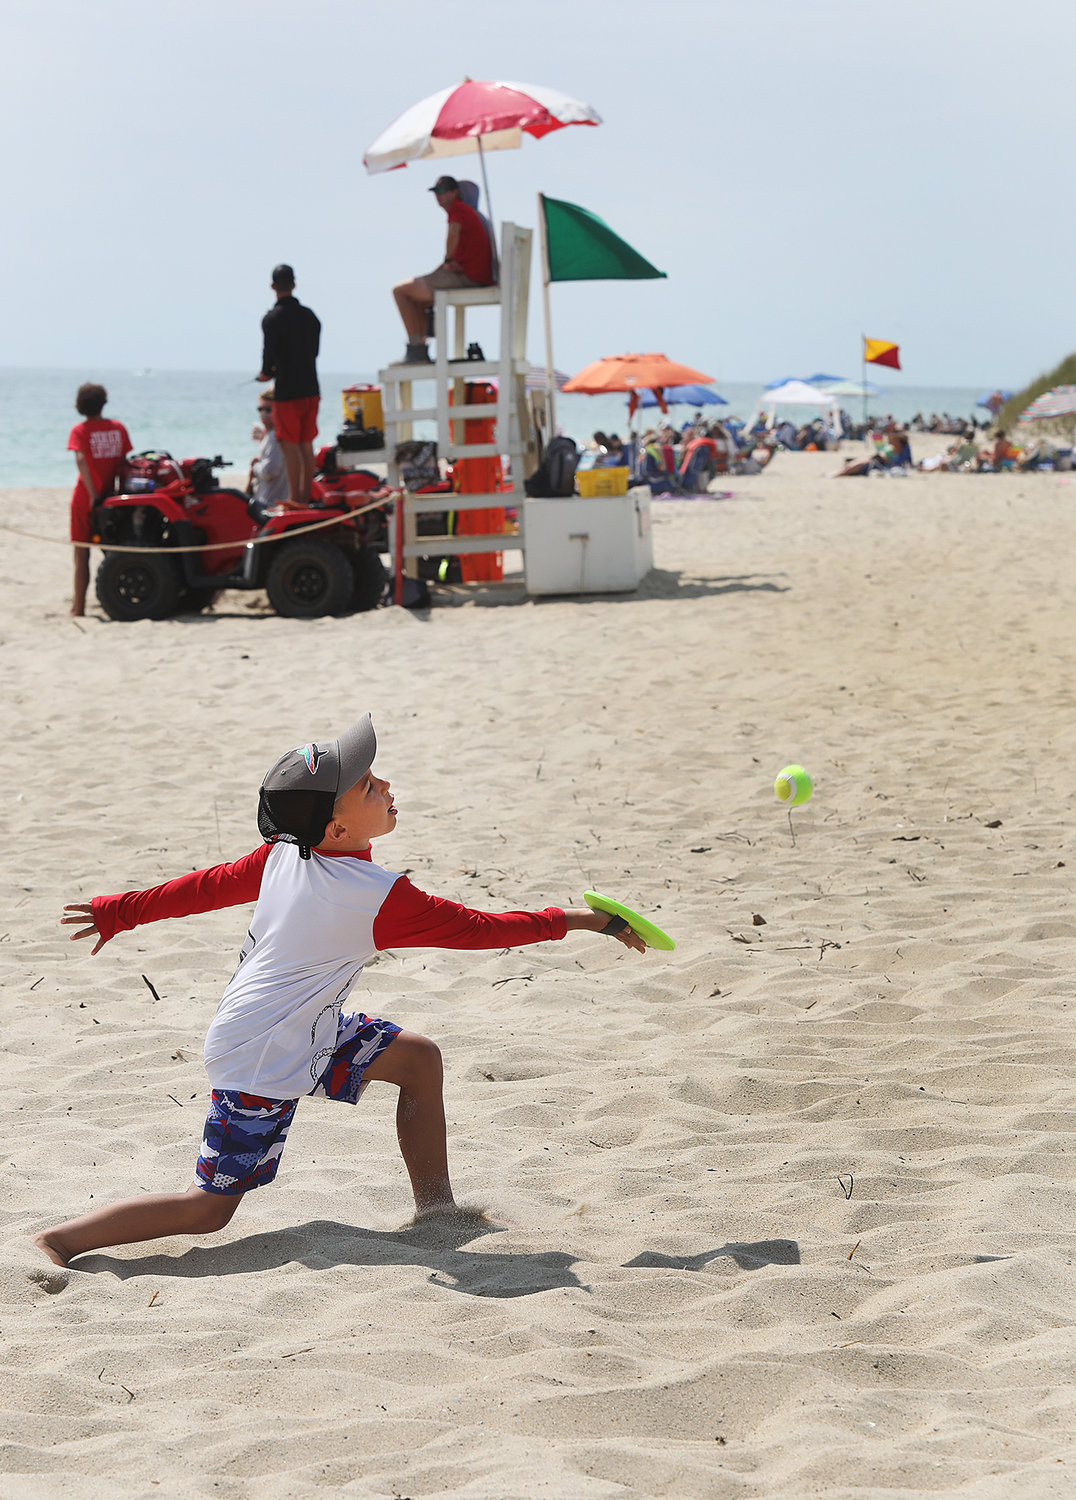 Six-year-old Zachary Luther, visiting with his family from Swansea, plays a game of catch as lifeguards keep watch on a green flag day at Miacomet Beach on the first day of August.